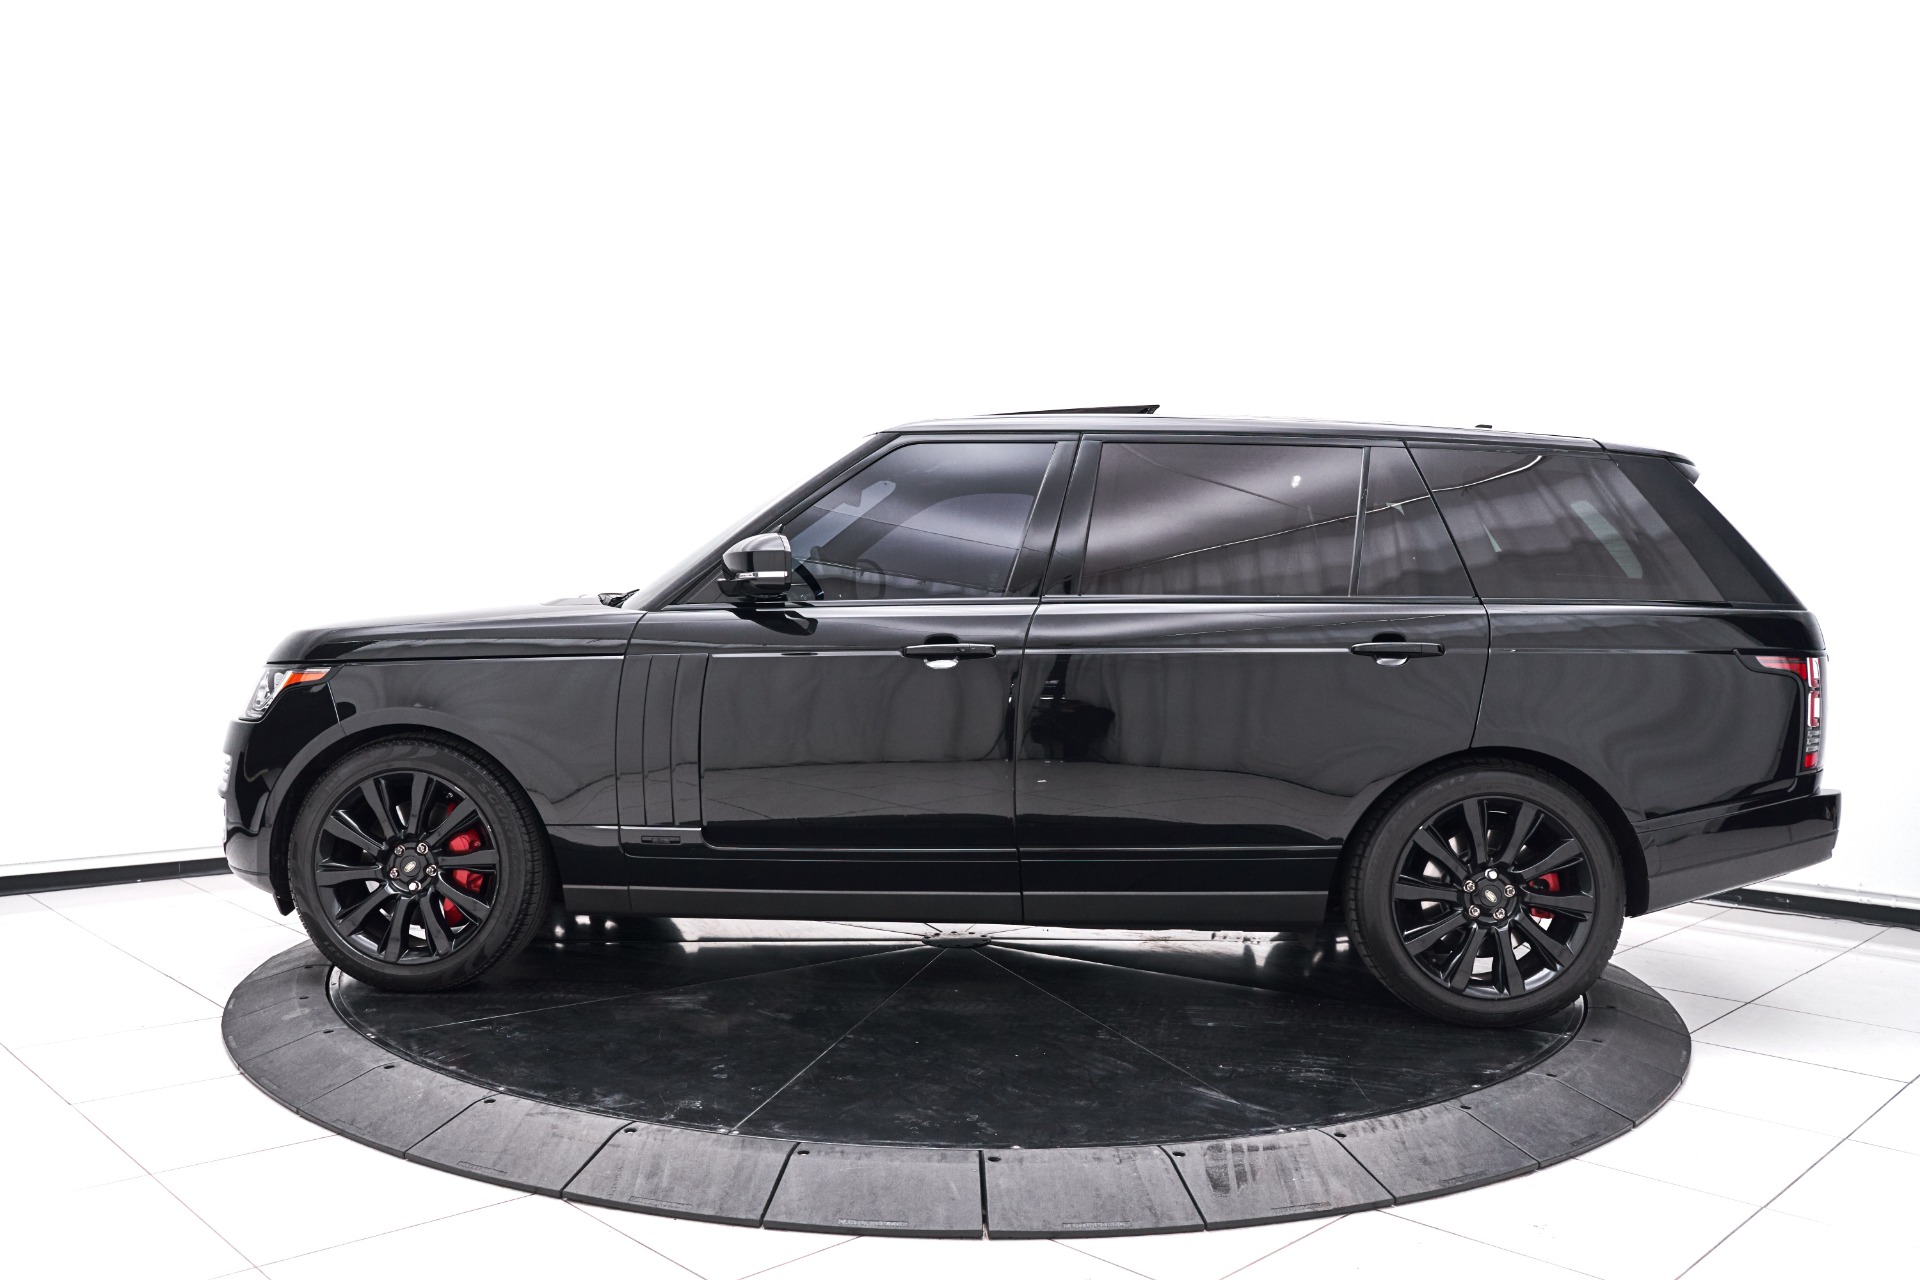 Used 2015 Land Rover Range Rover 5.0L V8 Supercharged For Sale (Sold) |  Lotus Cars Las Vegas Stock #222739A